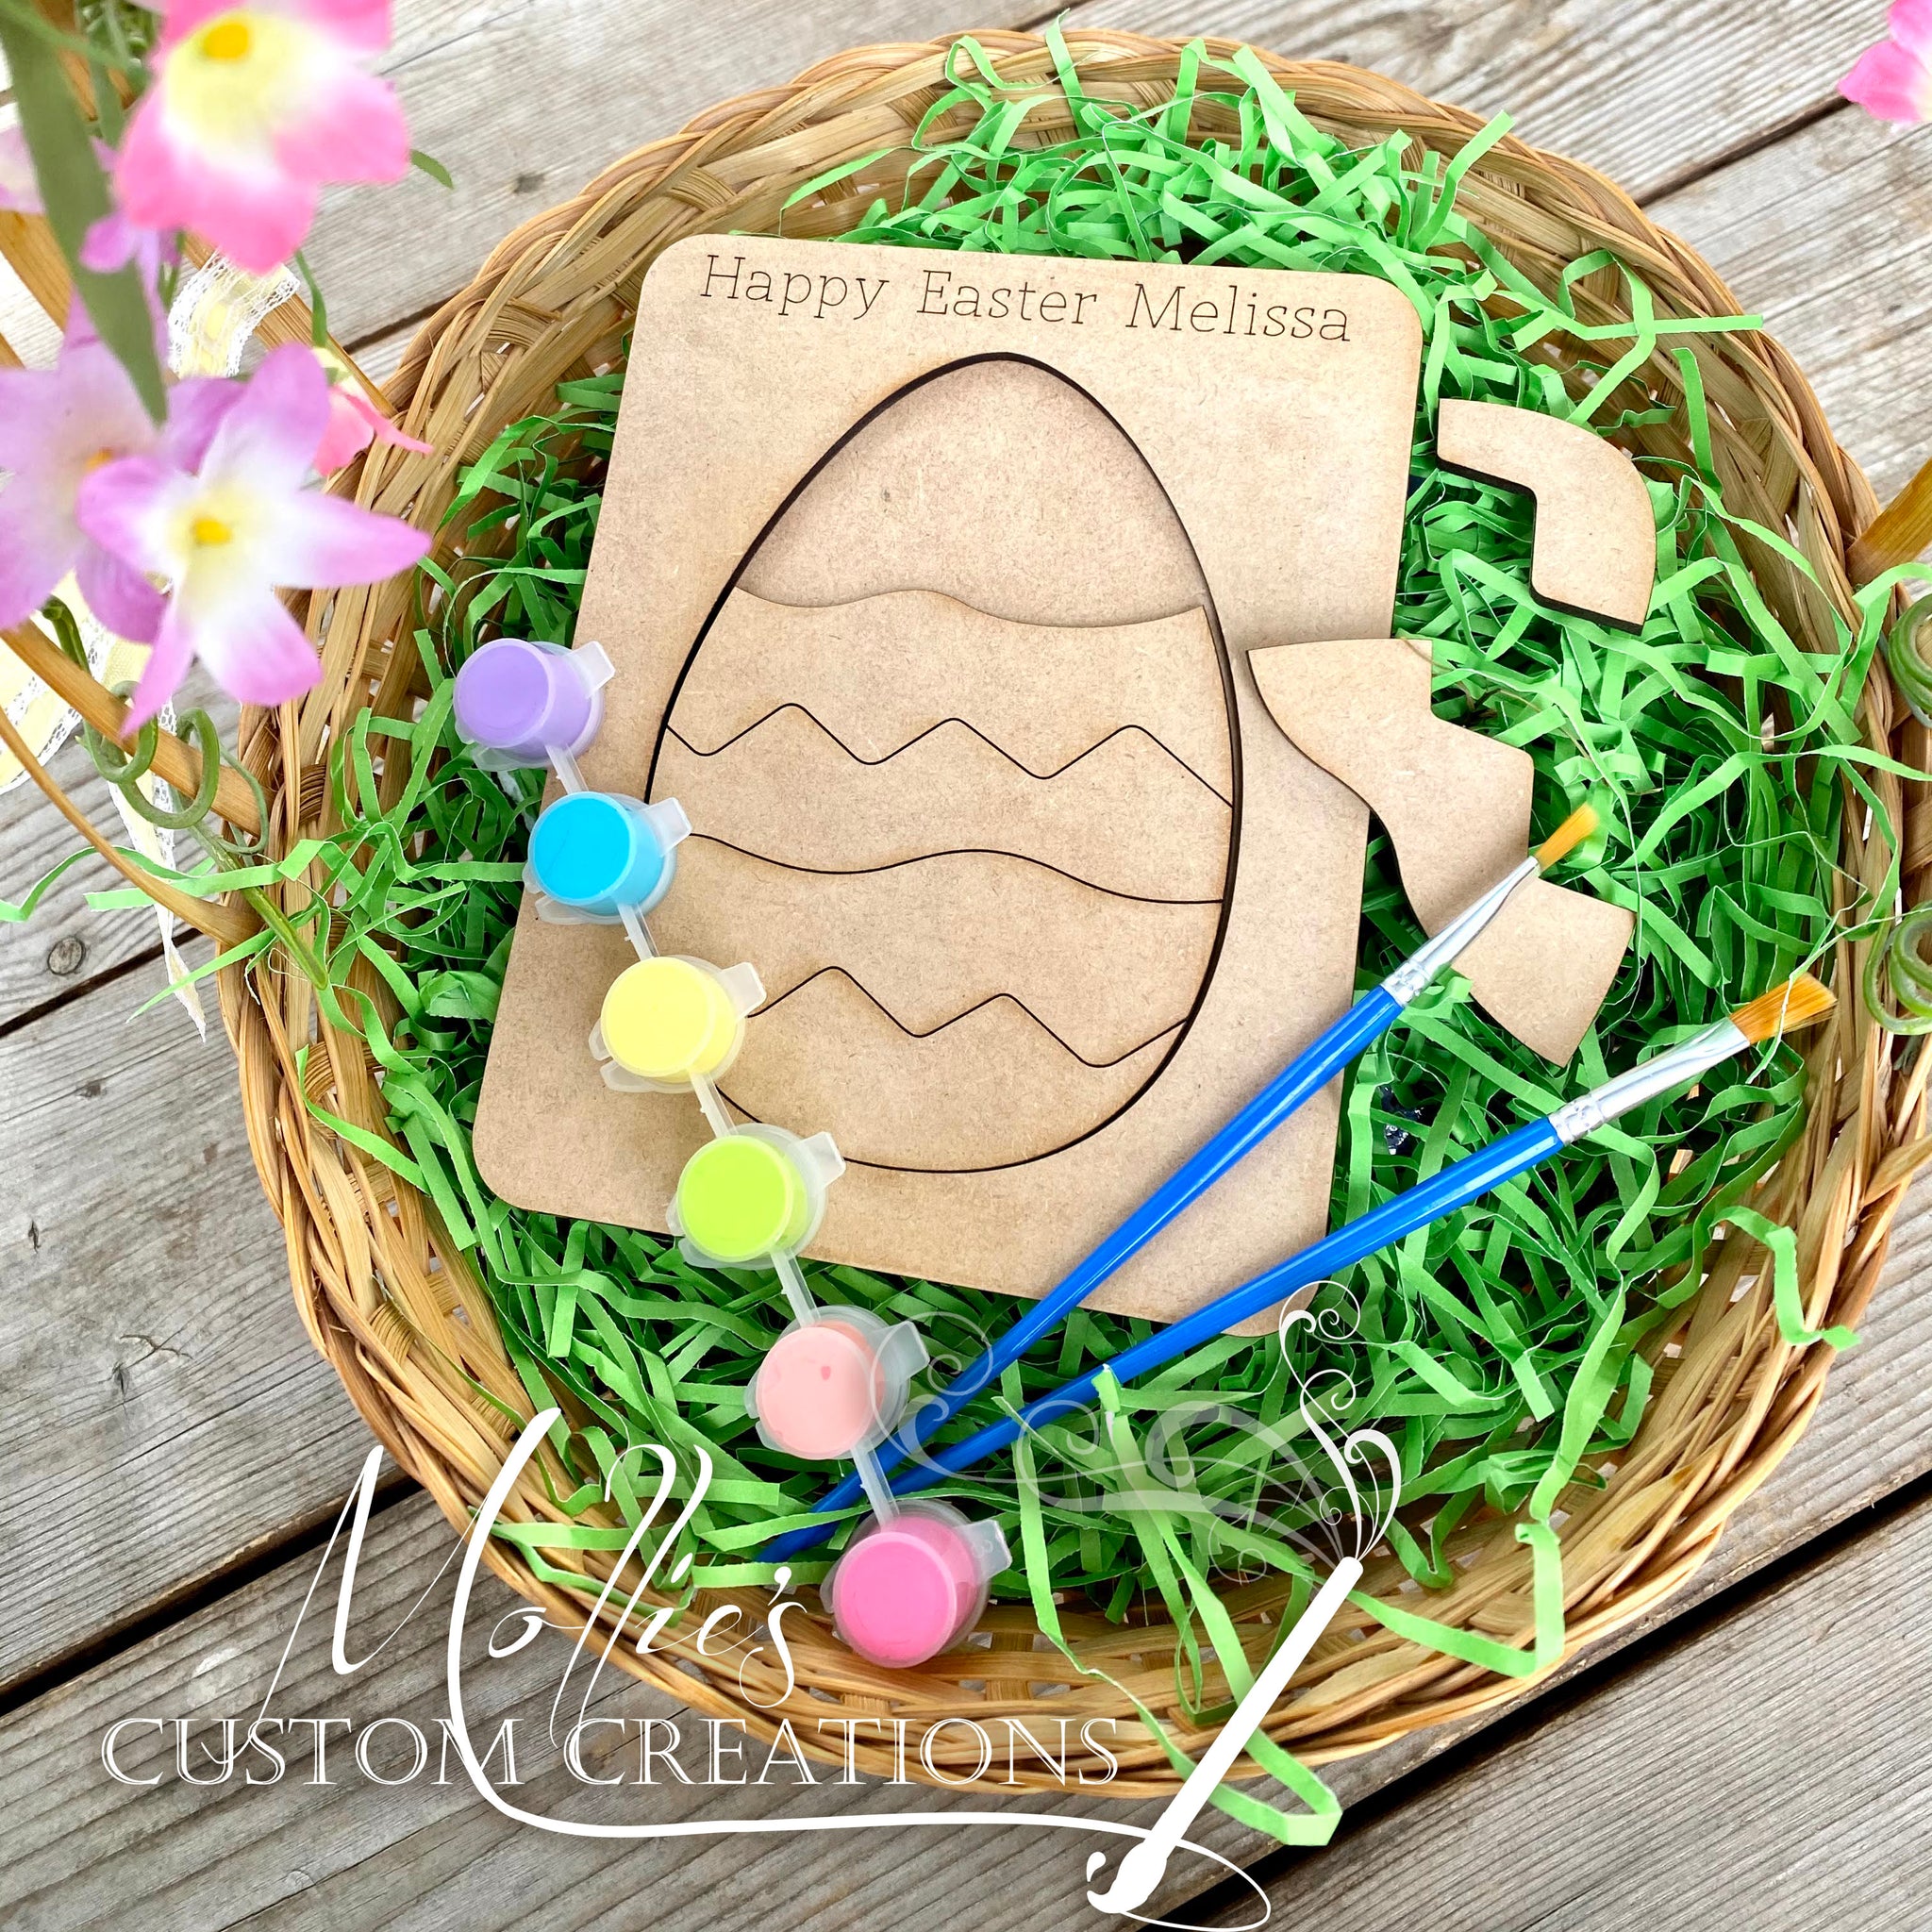 Personalized Easter Egg Mini Paint Kit - Easter Basket Filler - DIY - –  High Cotton Creations